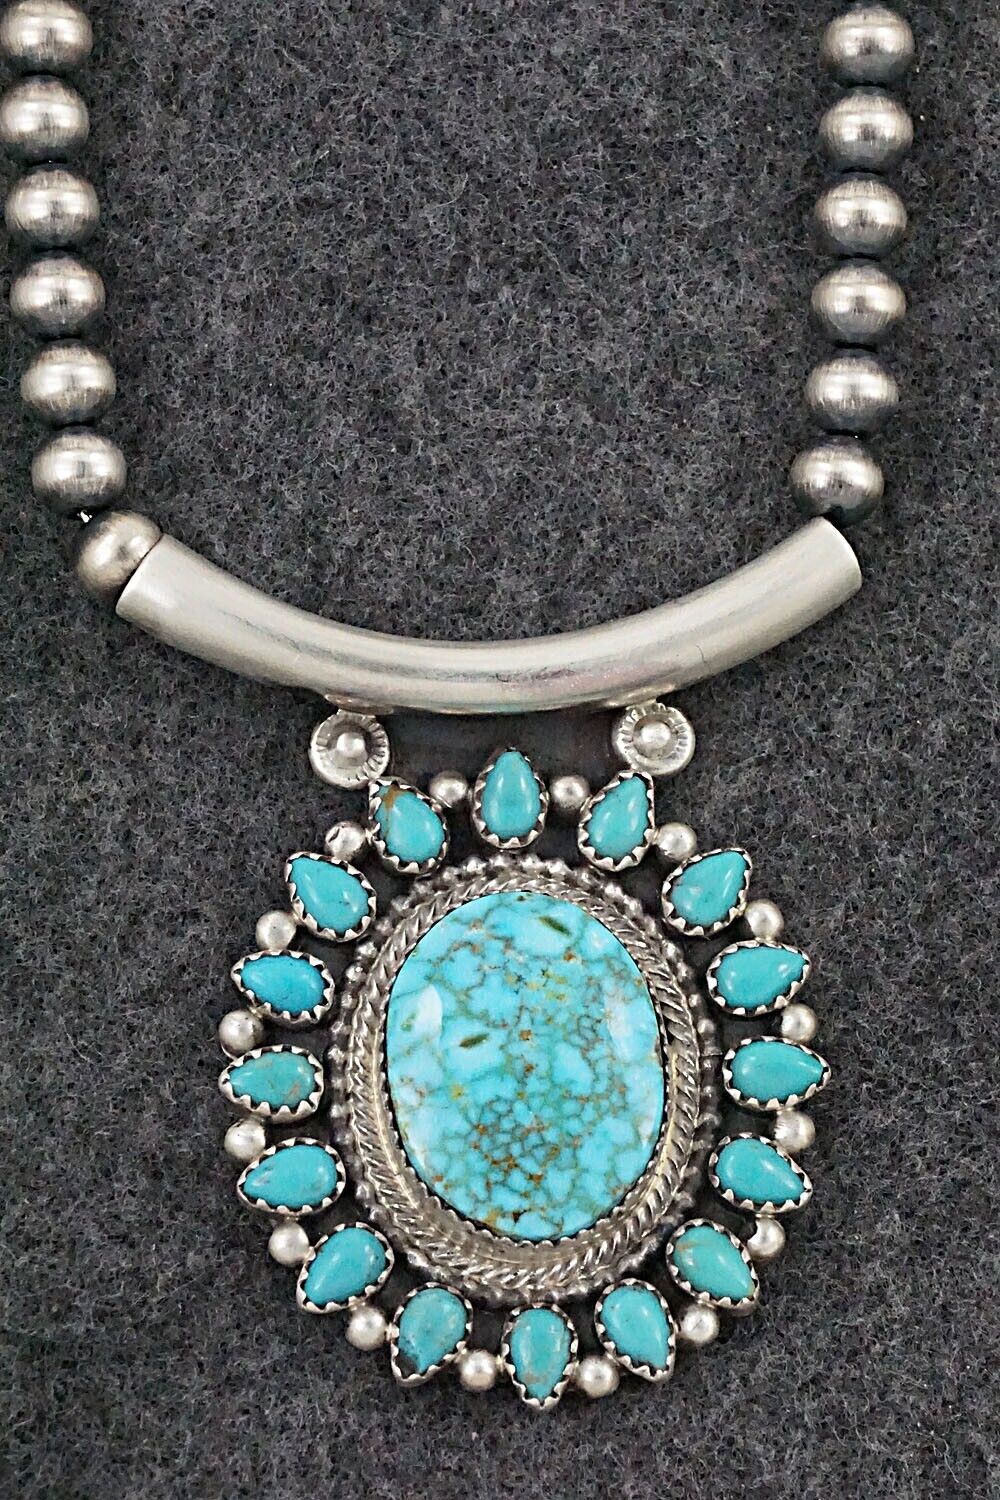 Turquoise & Sterling Silver Necklace - Tom Lewis